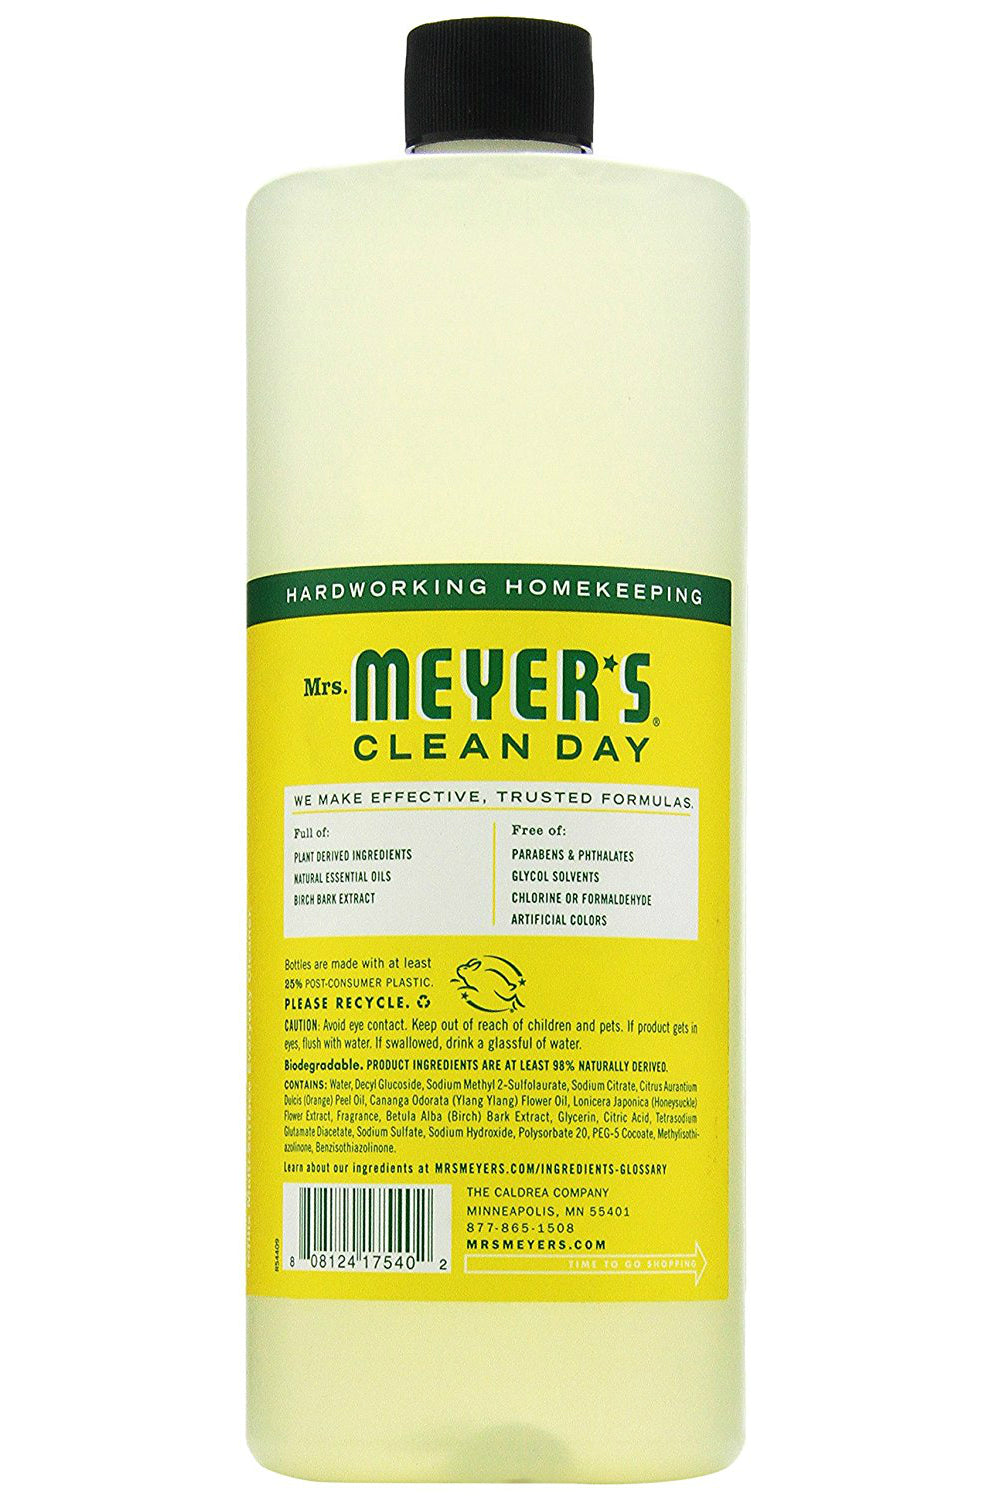 Mrs. Meyer's Clean Day® 17540 Multi-Surface Concentrate, Honeysuckle, 32 Oz